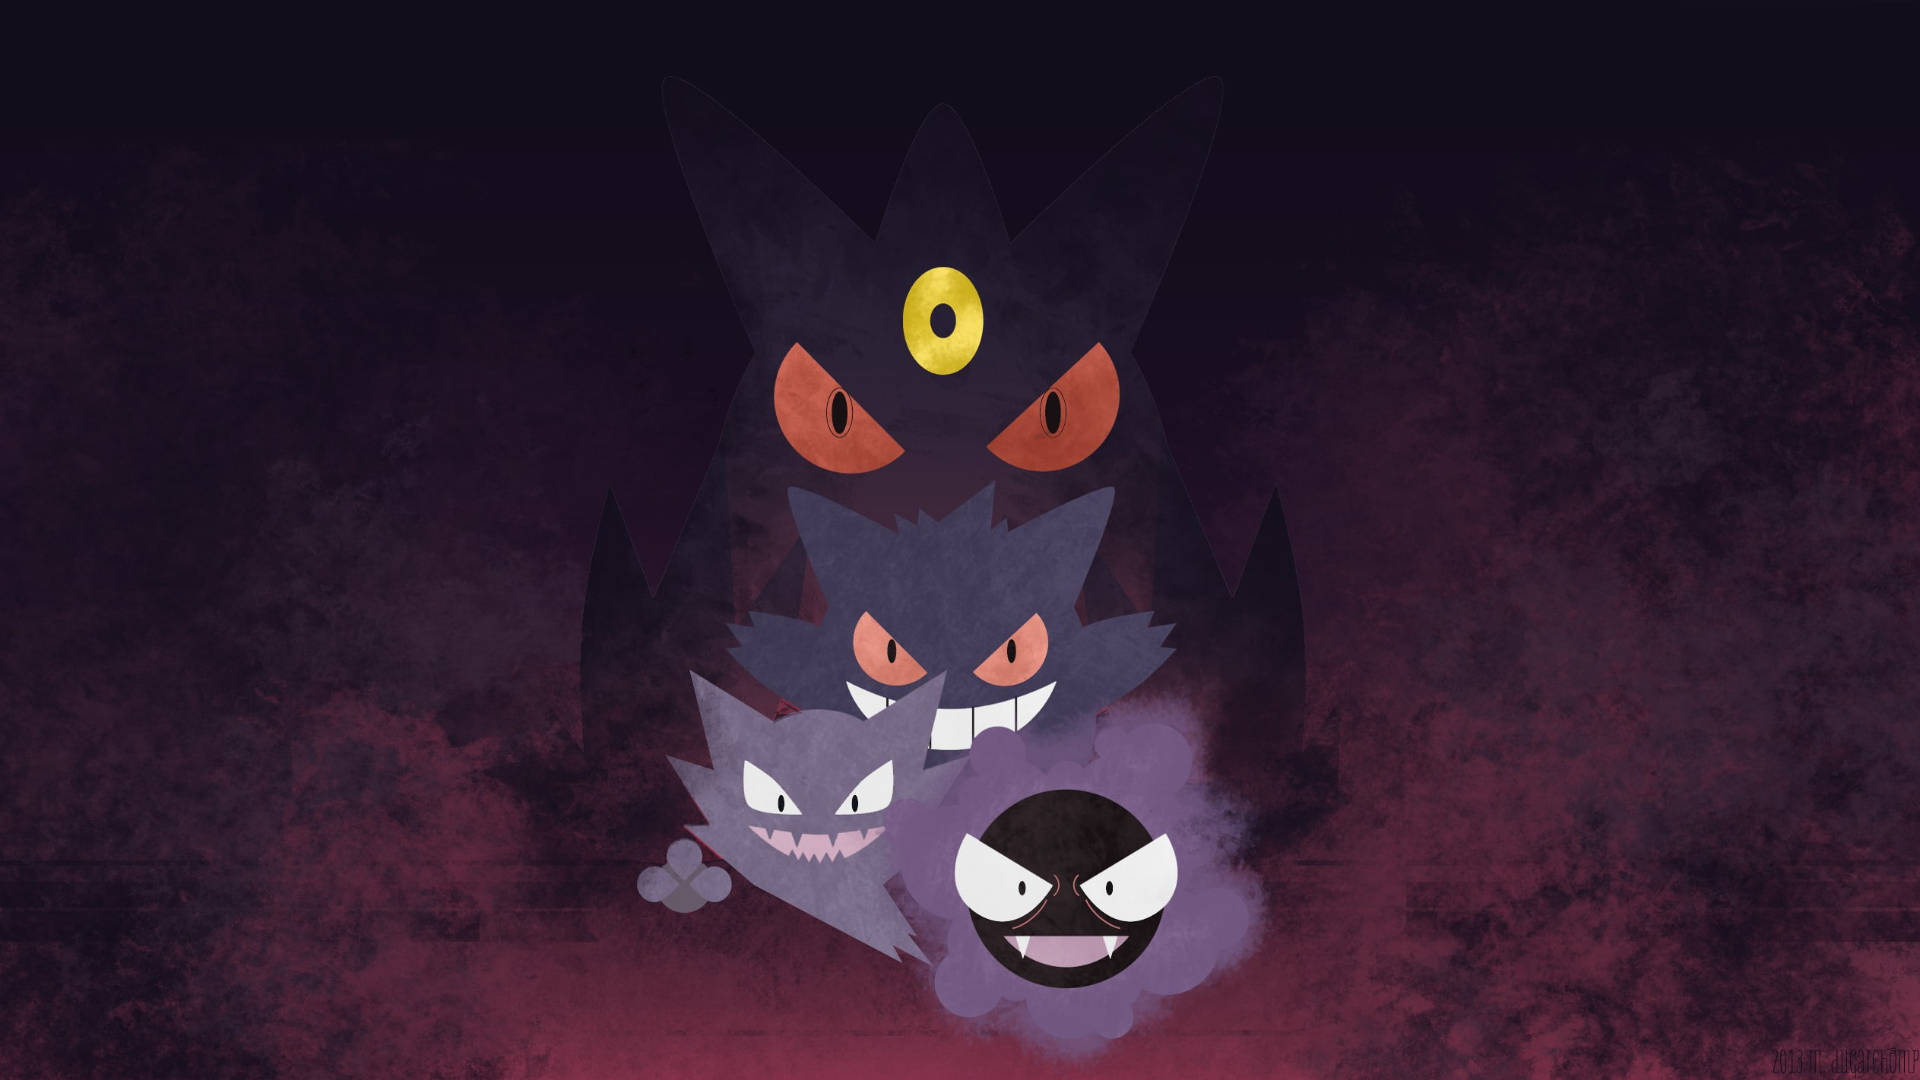 Take Your Battles To A Whole New Level With Gengar!